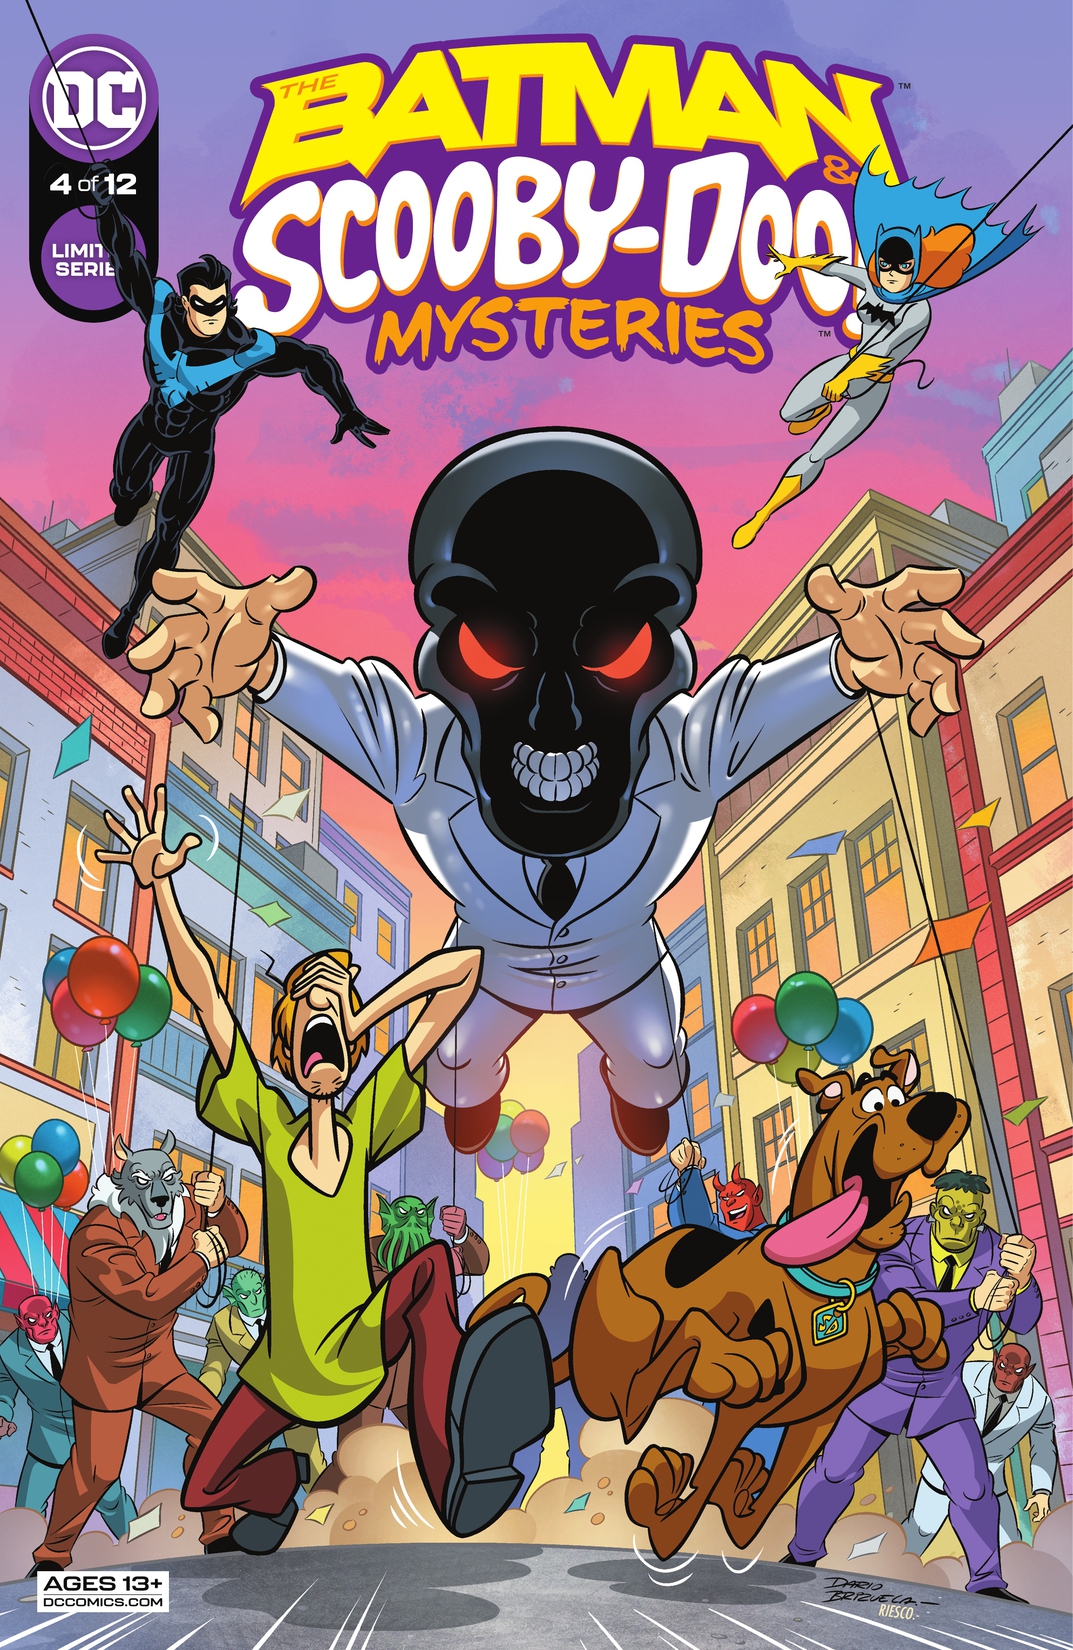 The Batman & Scooby-Doo Mysteries #4 preview images